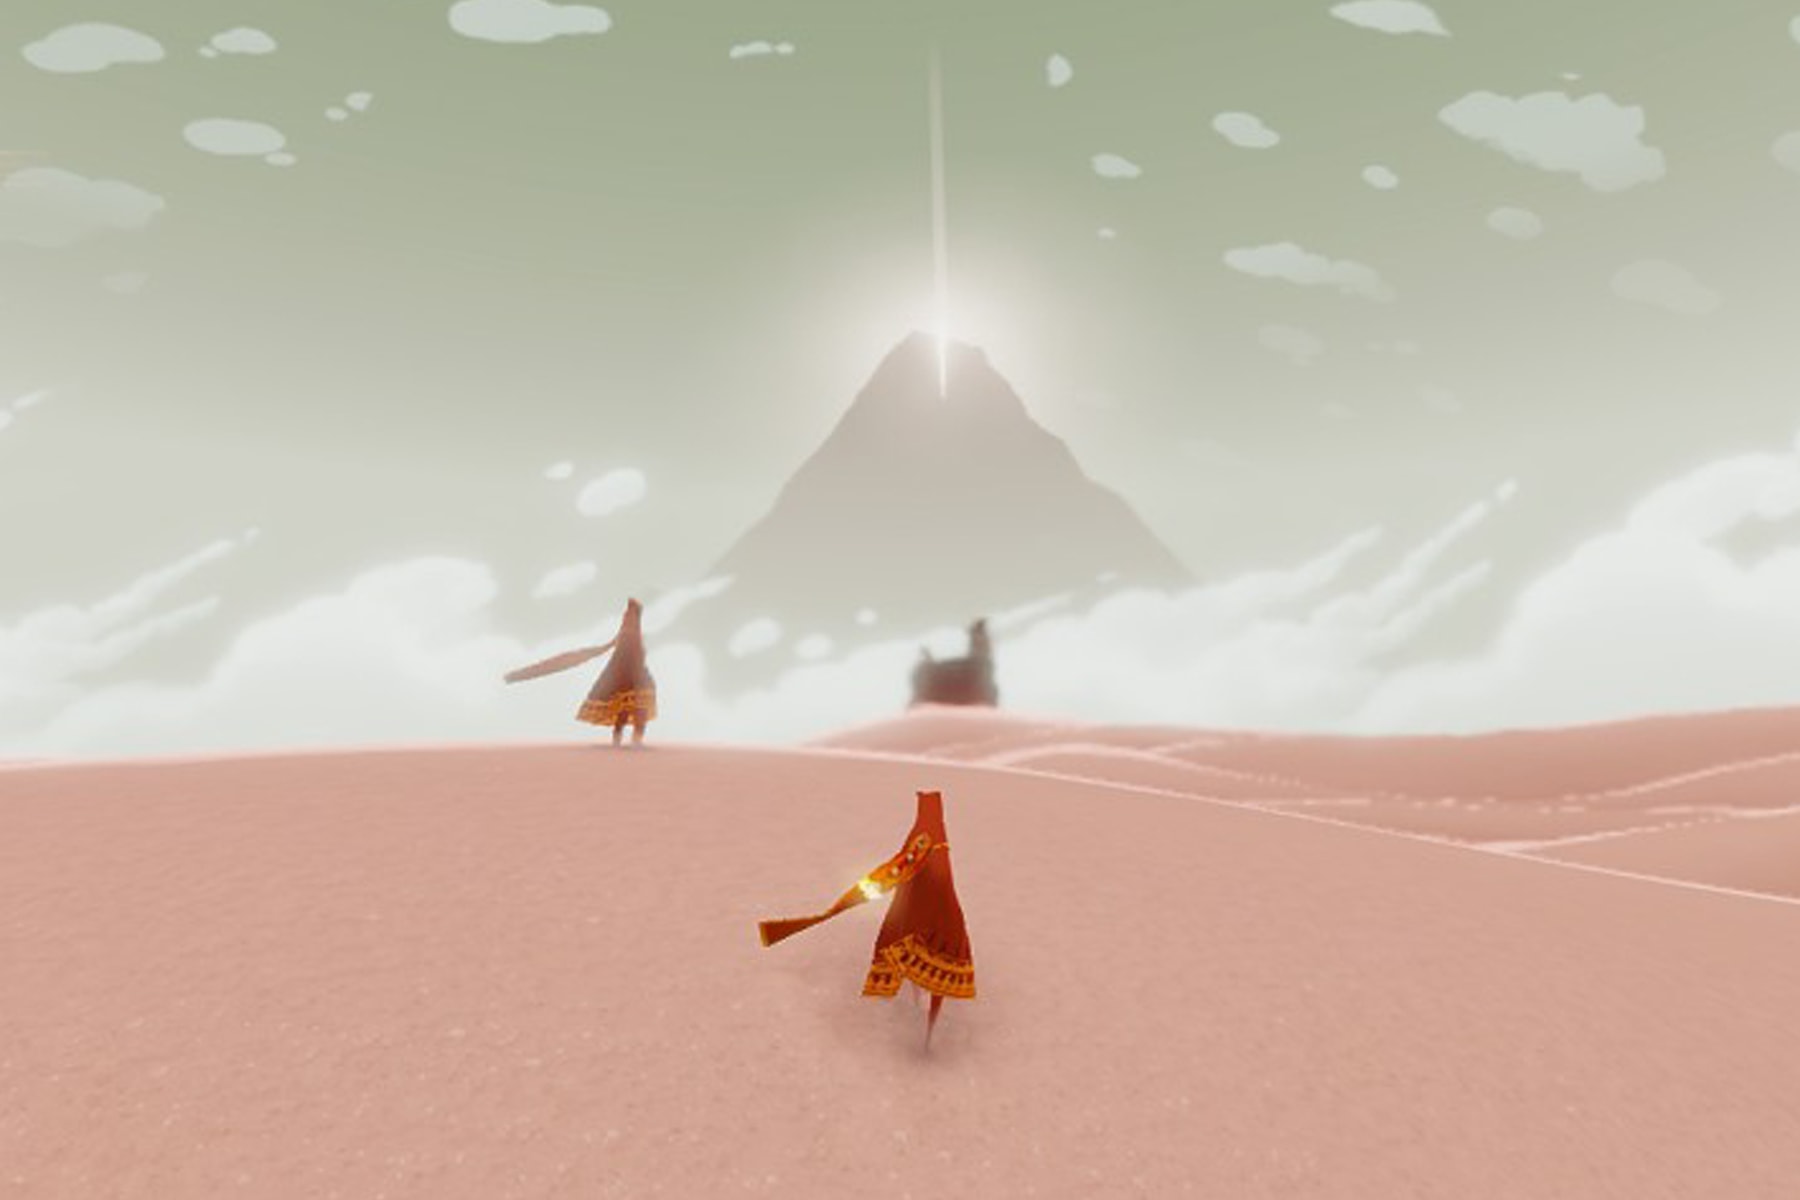 Screenshot from Playstation 3 game Journey, featuring characters walking on pink sand toward a mountain